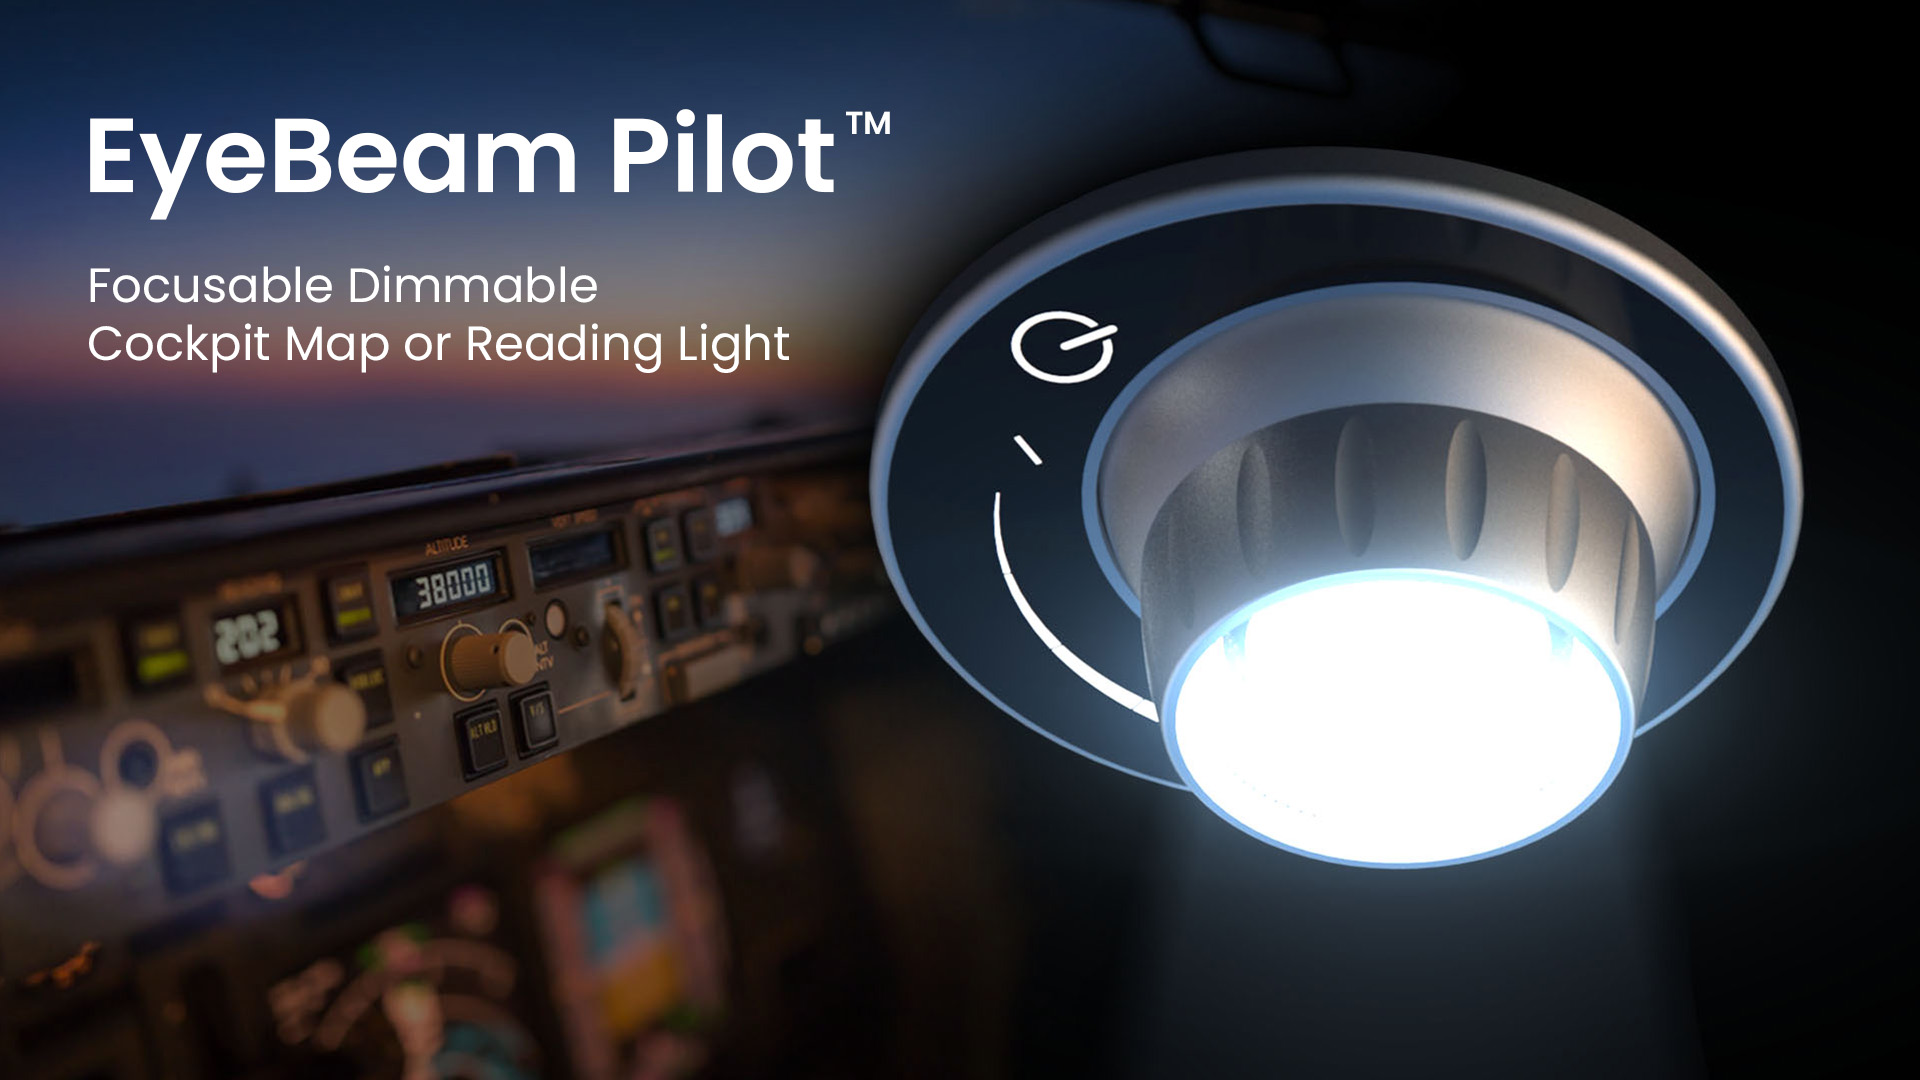 EyeBeam Pilot- Aircraft interior focusable dimmable cockpit map or reading light